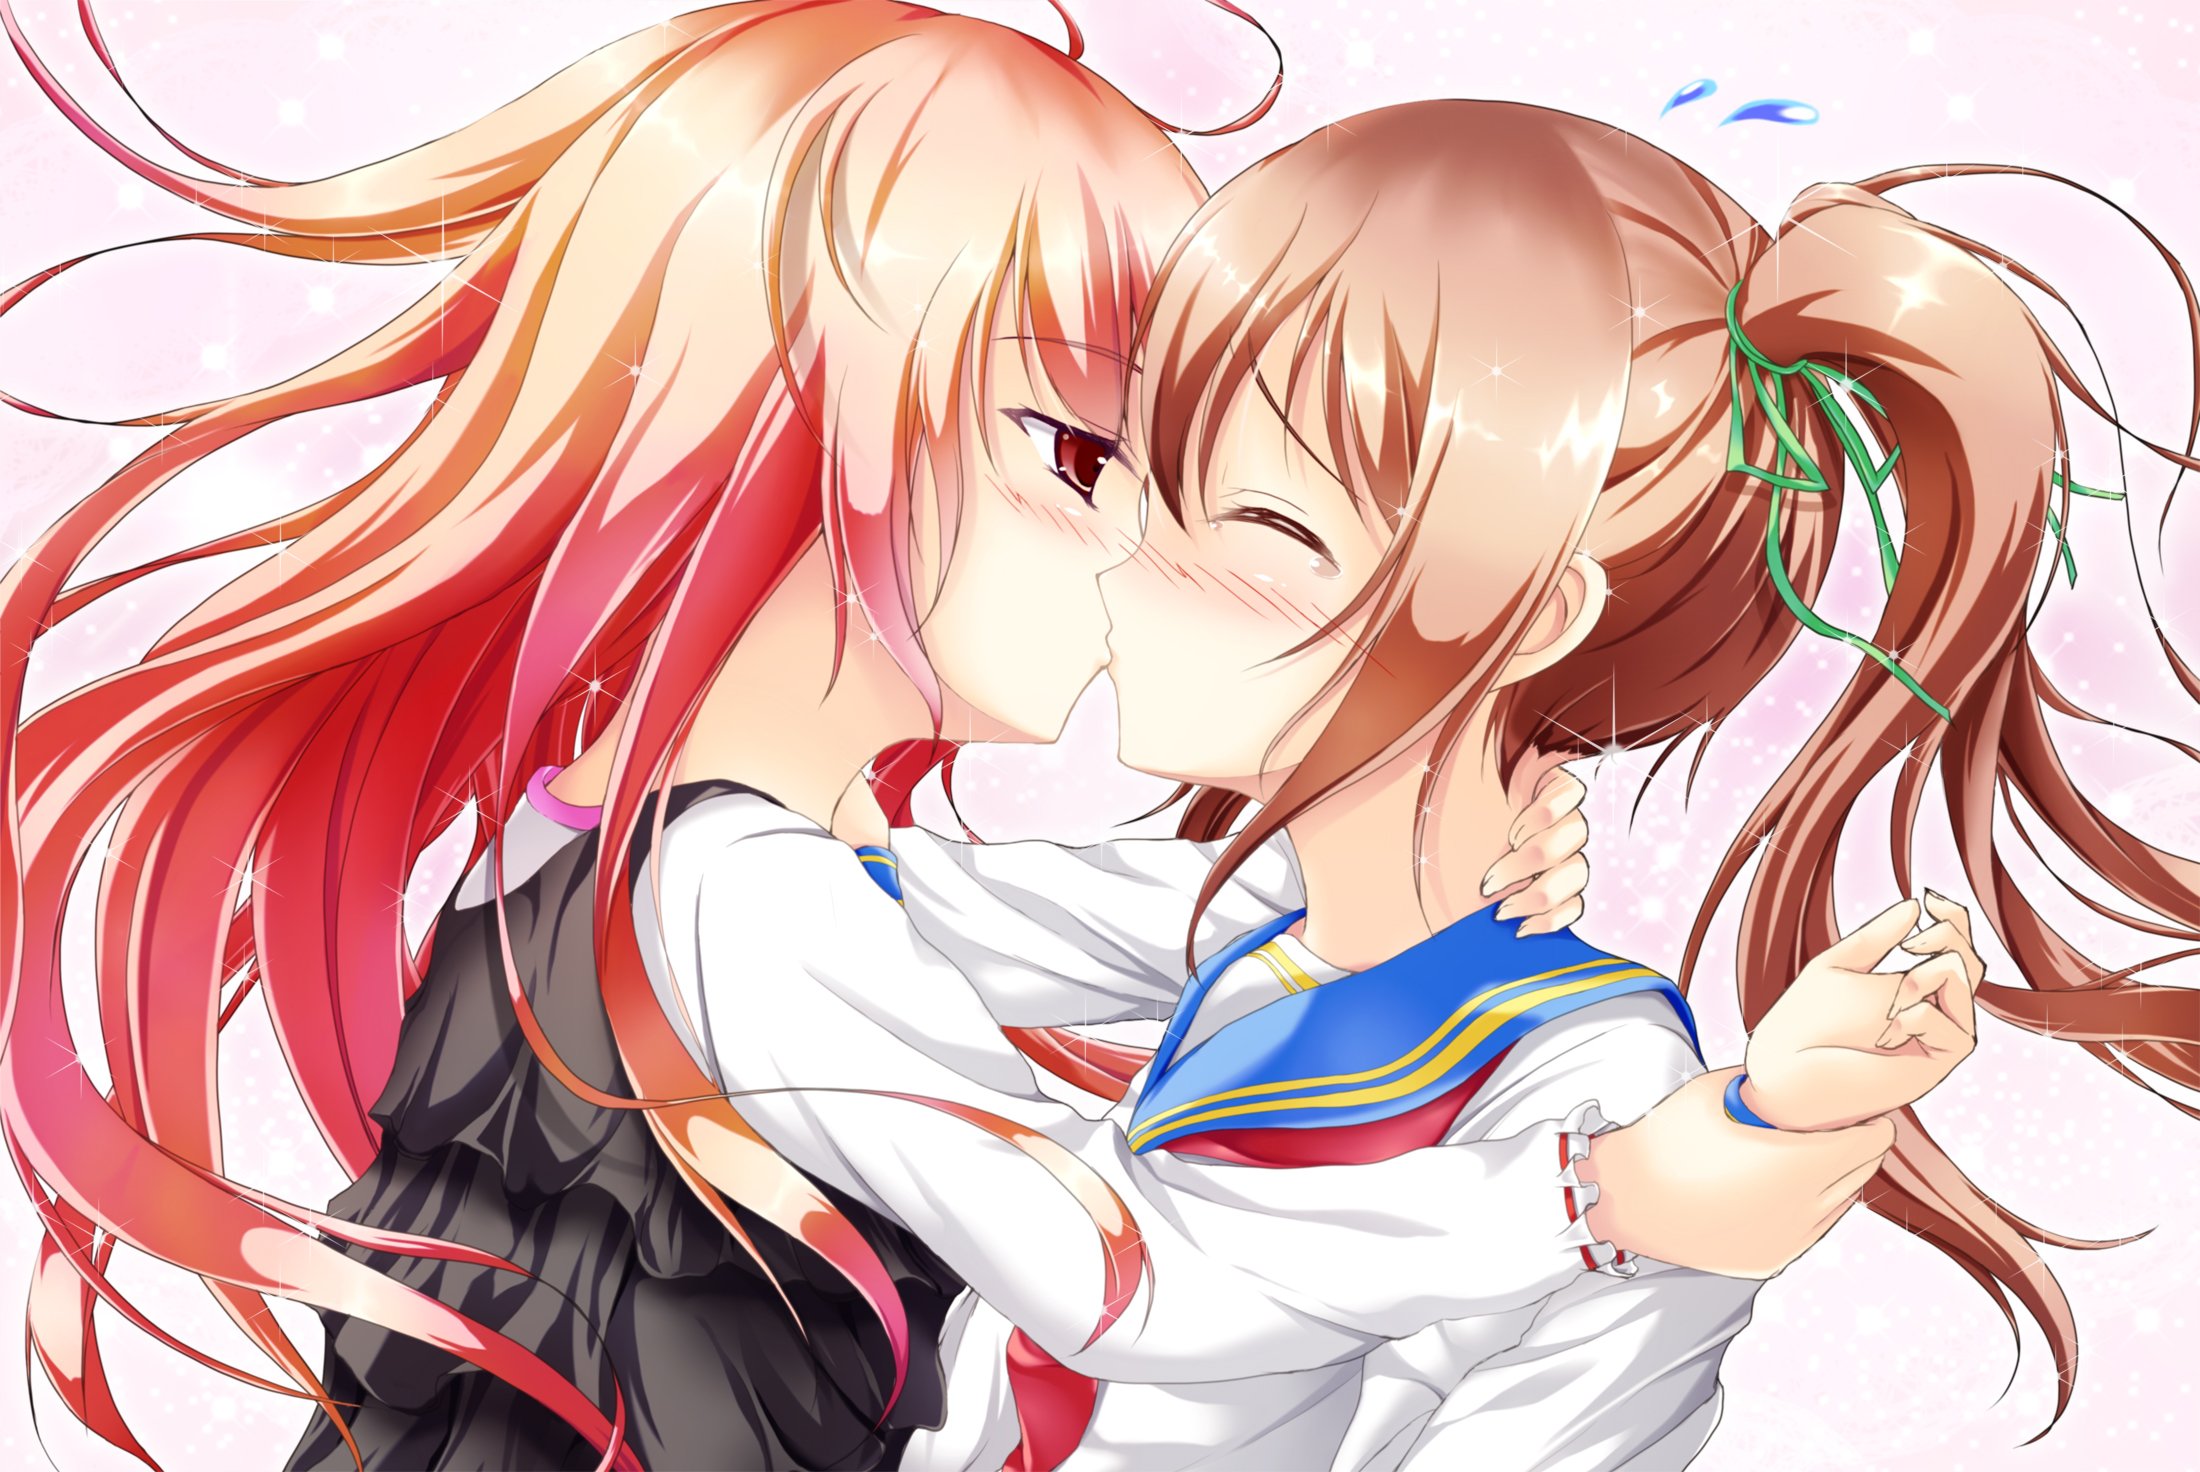 Kissing Anime Girls Wallpapers - Wallpaper Cave